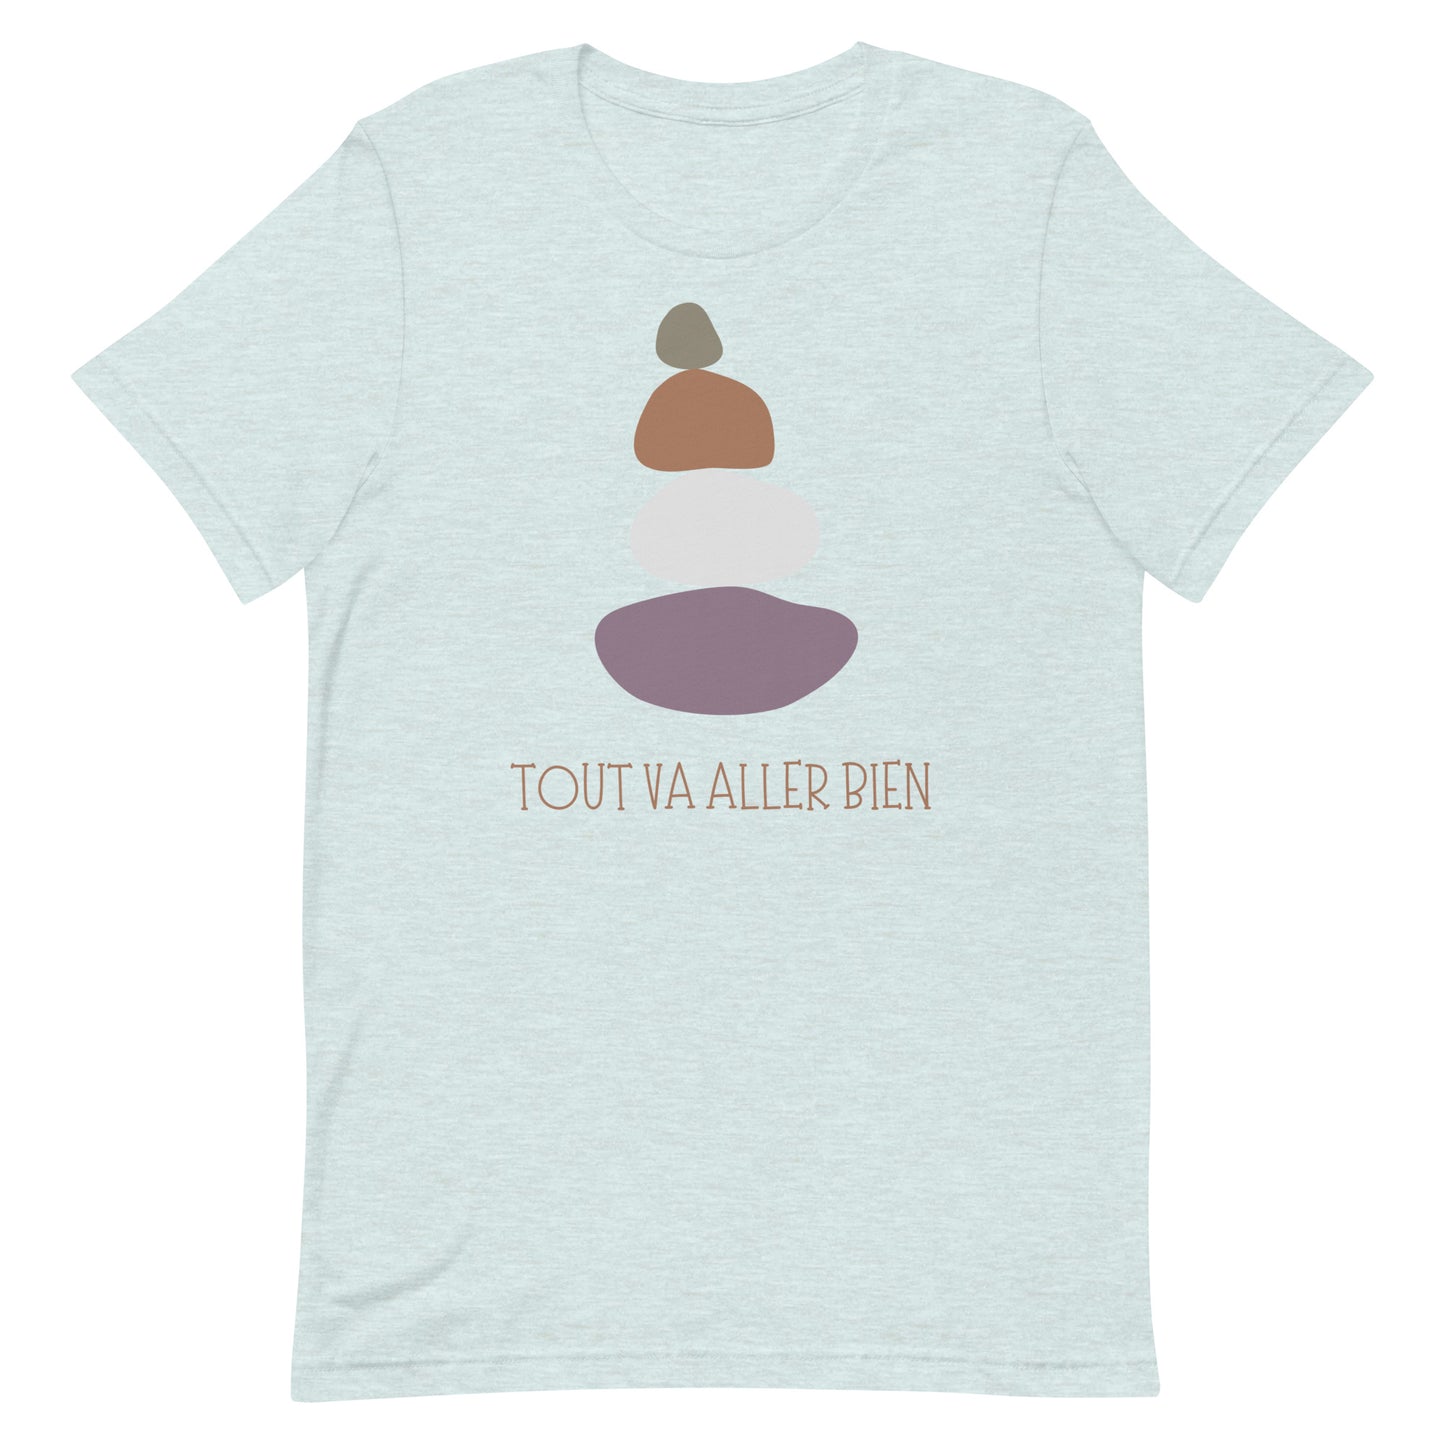 Unisex t-shirt | french inspirational quote | Soft and comfortable | unisex clothing | positive message | Meditation | Peace t-shirt